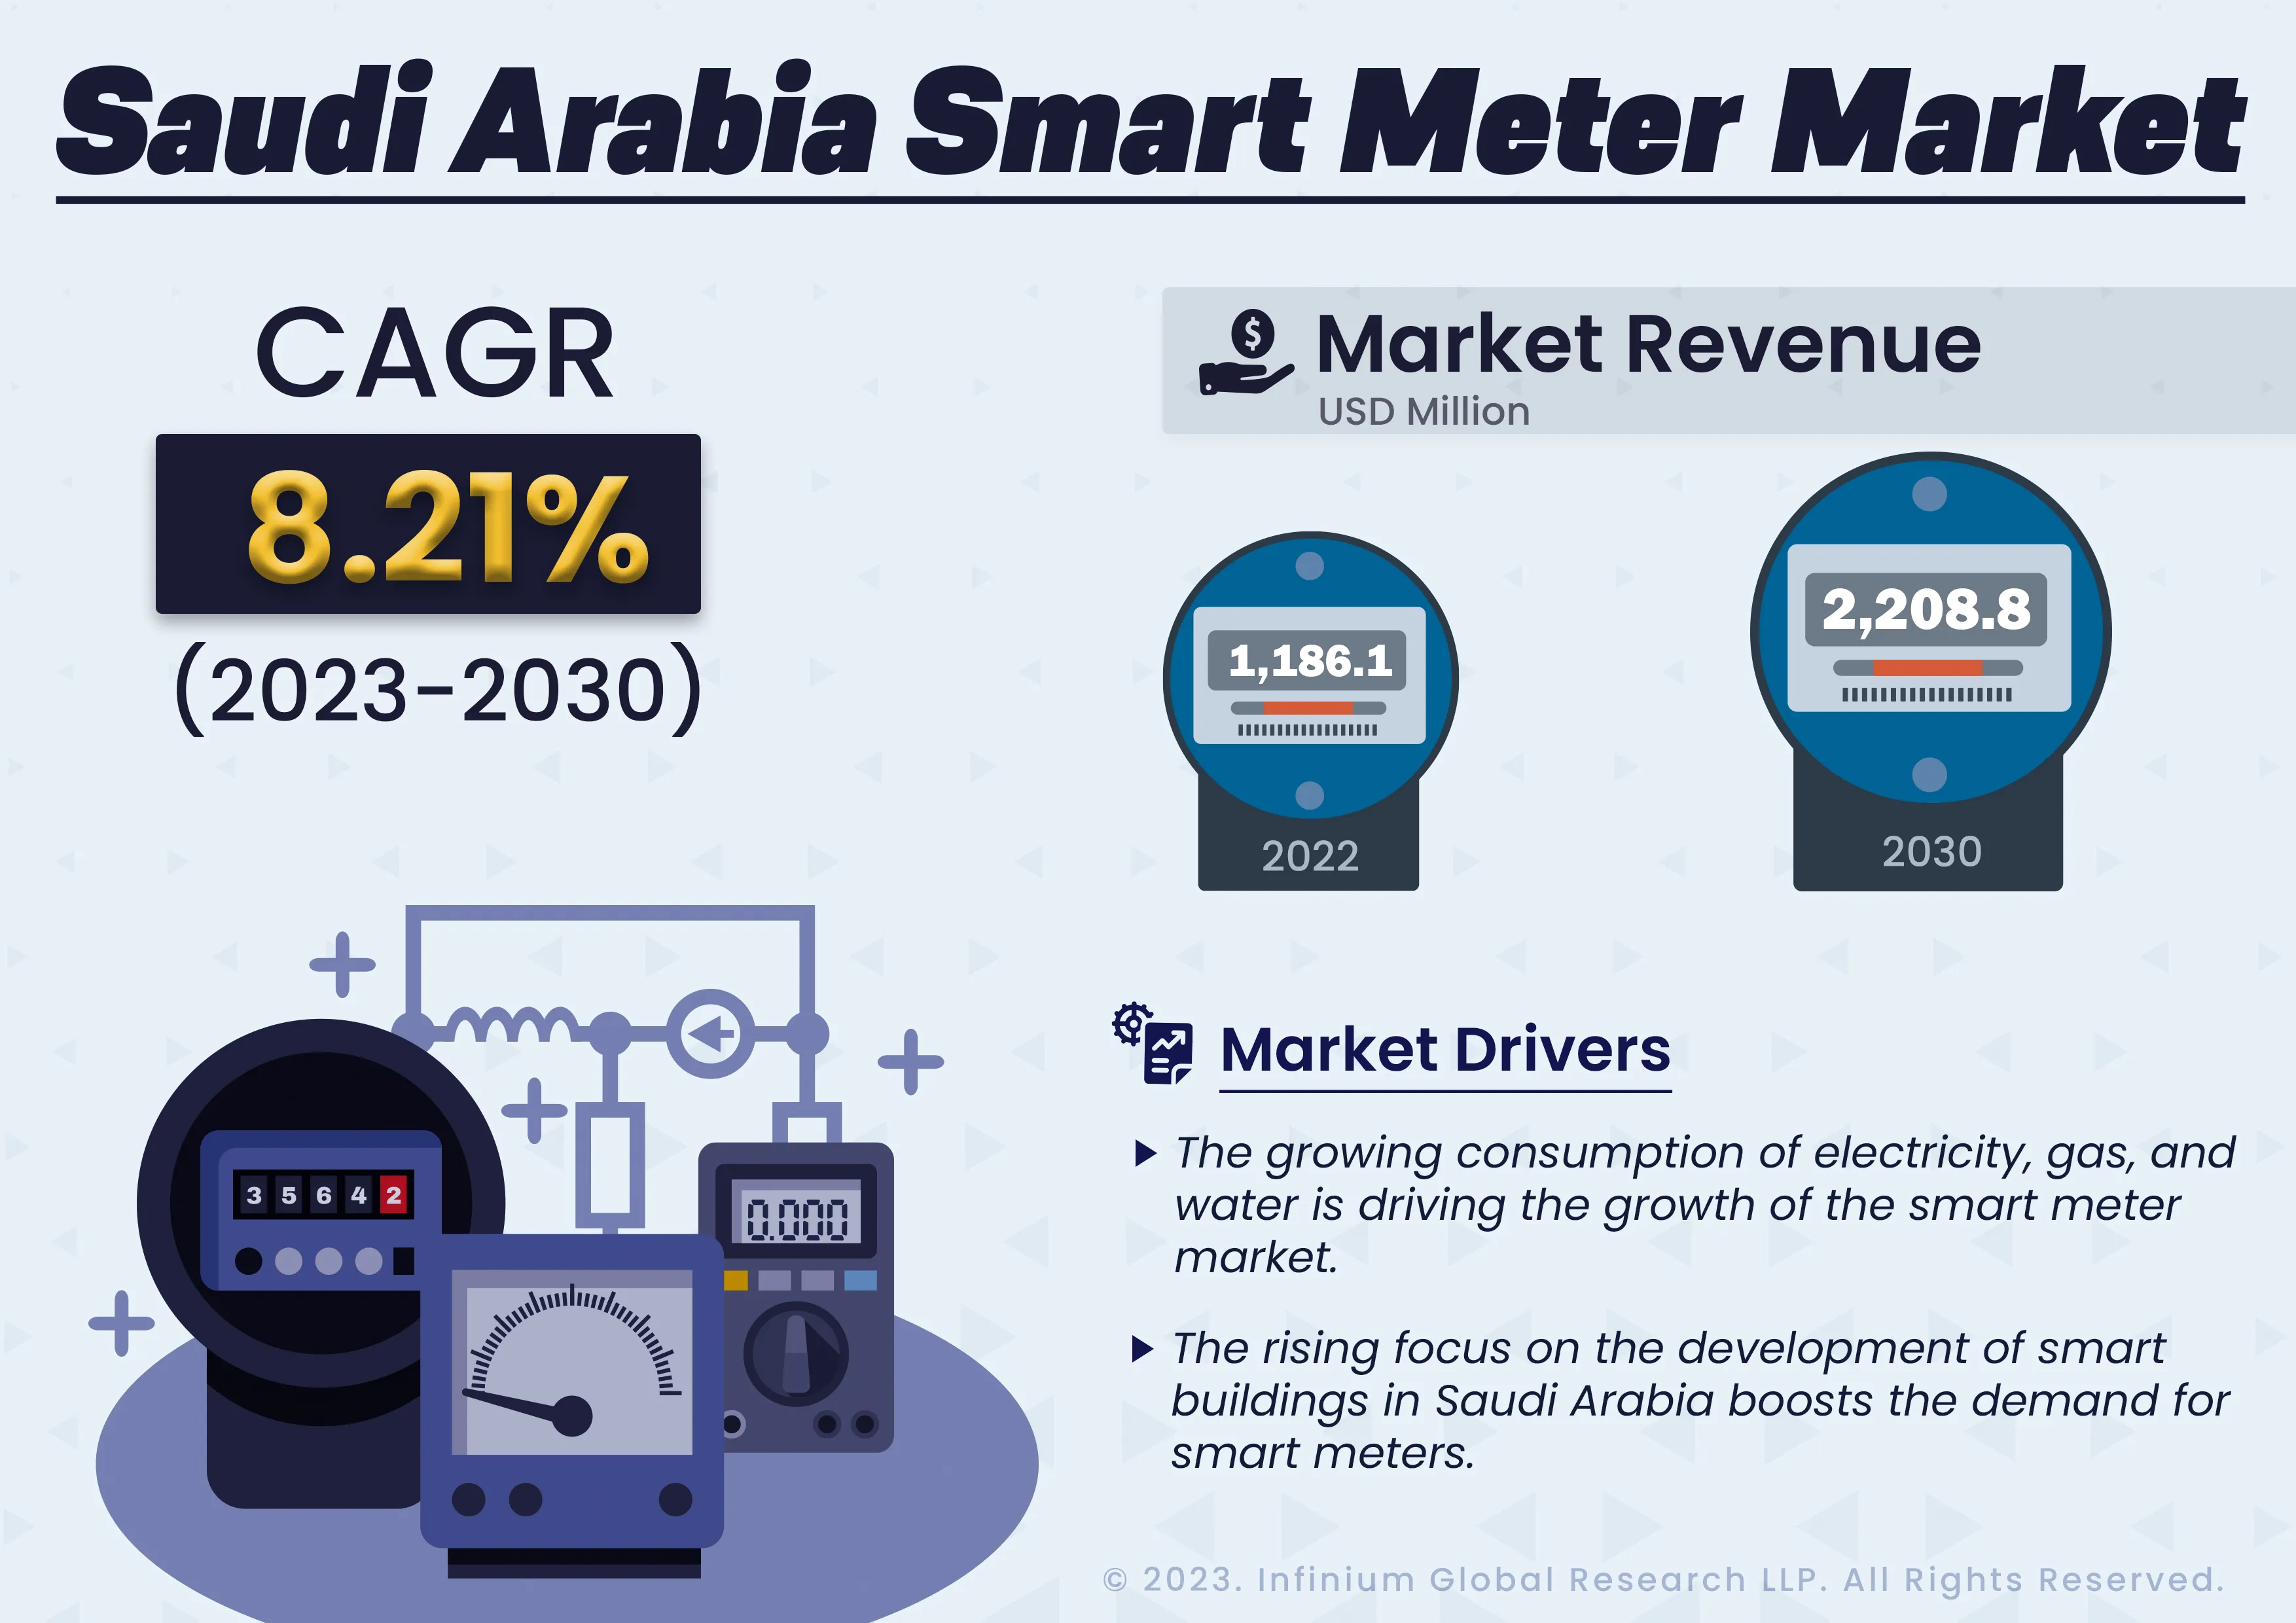 Saudi Arabia Smart Meter Market was Valued at USD 1,186.1 Million in 2022 and is Expected to Reach USD 2,208.8 Million by 2030 and Grow at a CAGR Of 8.21% Over the Forecast Period.